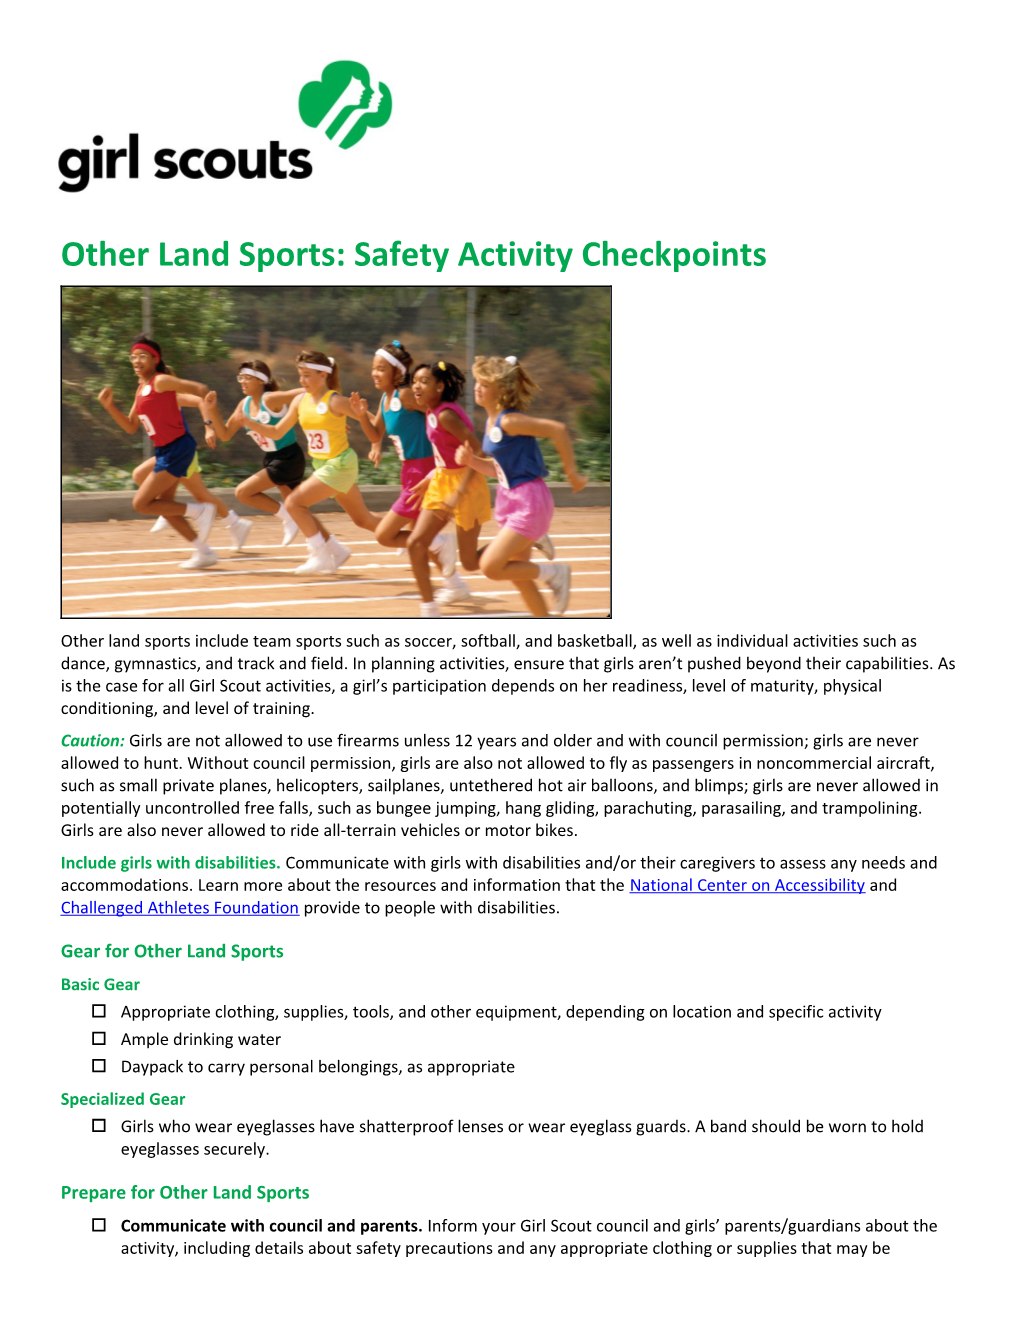 Other Land Sports: Safety Activity Checkpoints